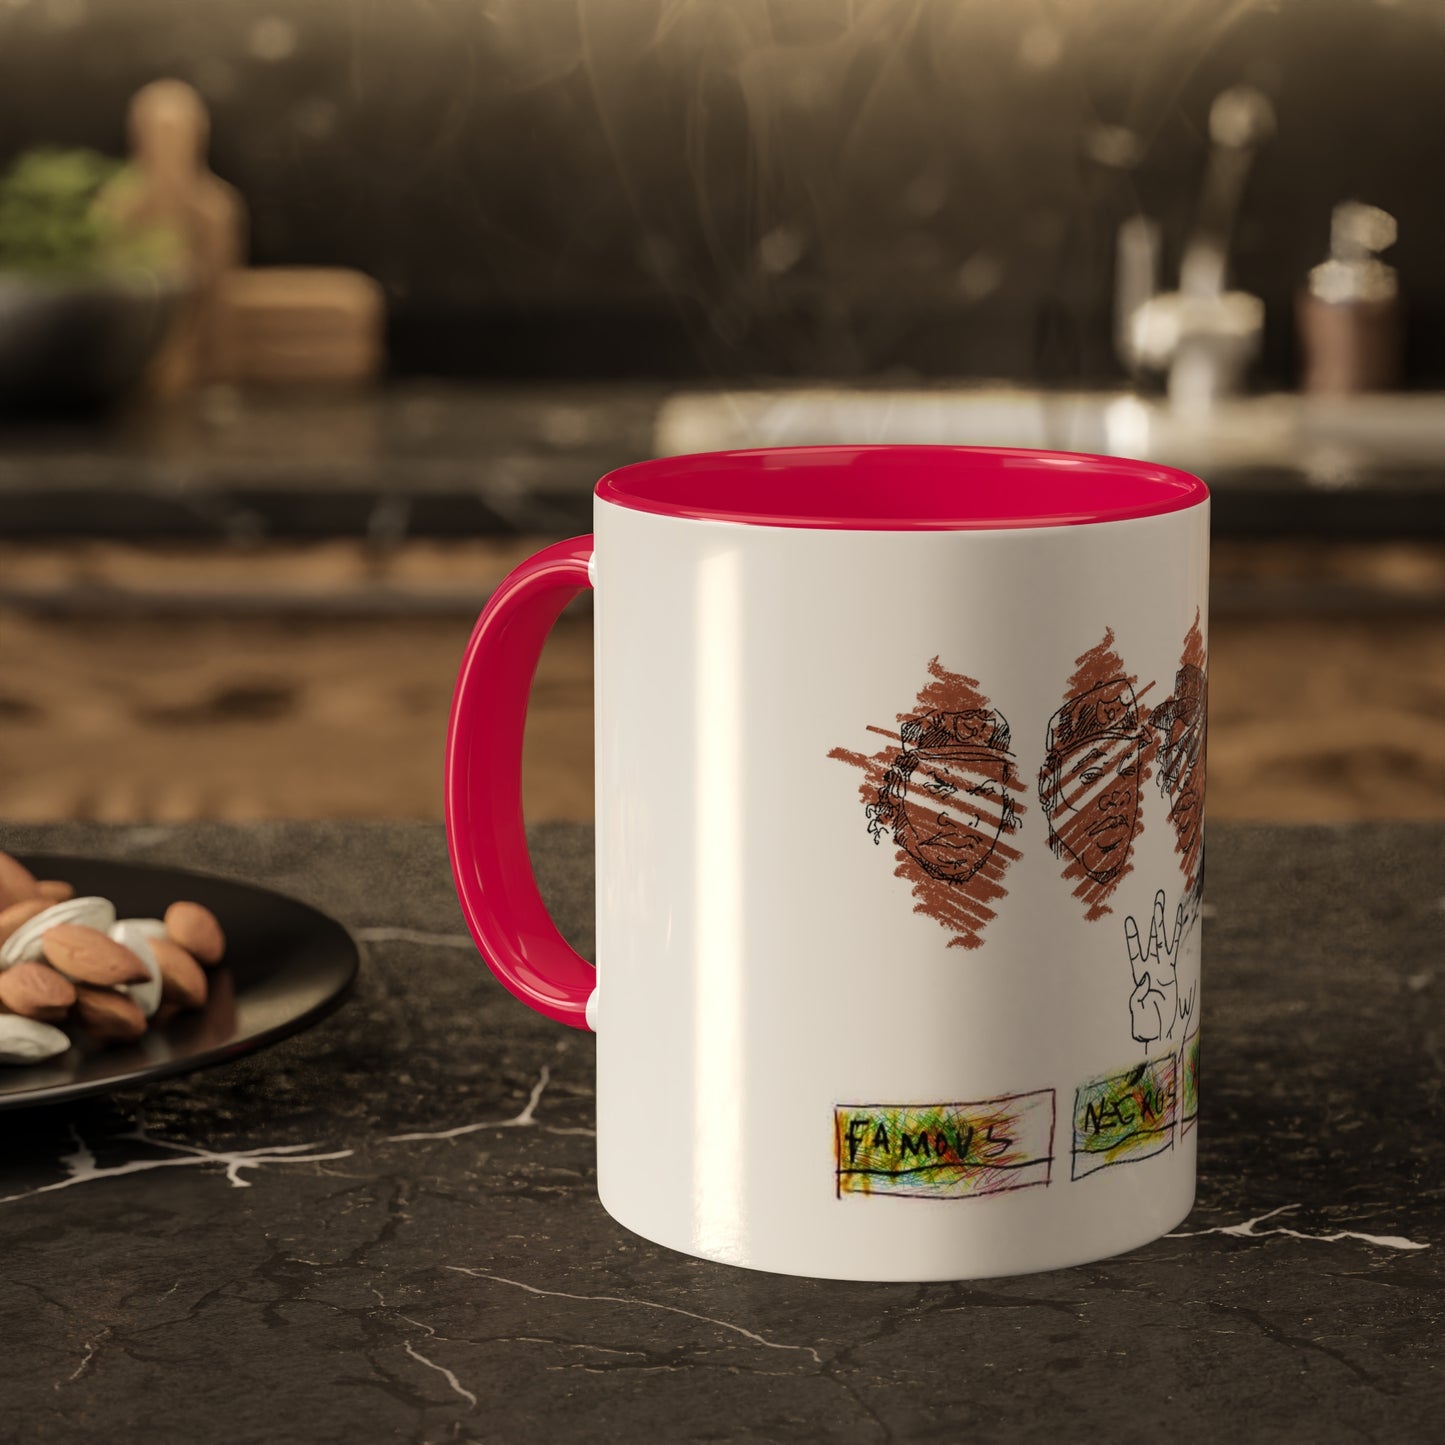 Famous Negro Rappers with an attitude #2 - Colorful Mugs, 11oz